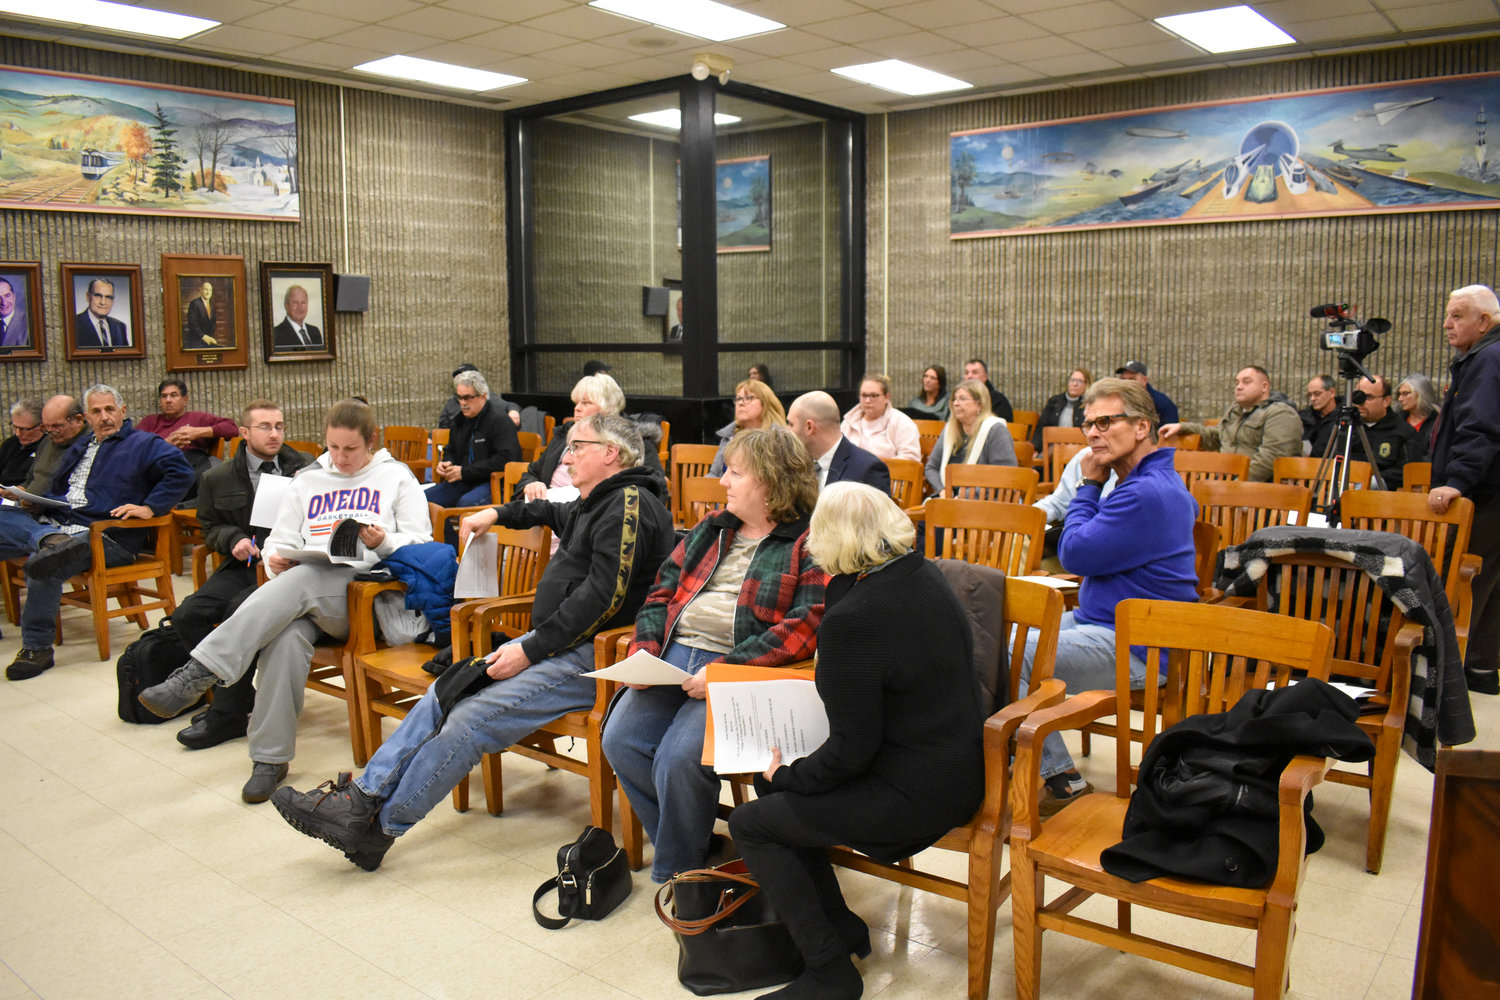 Residents and officials, including those from the city of Oneida, village of Wampsville, and town of Lenox, gathered in Oneida City Hall on Dec. 19, for a public hearing to discuss a request for a portion of Daniels Drive in Oneida to join the village of Wampsville (and therefore the town of Lenox).